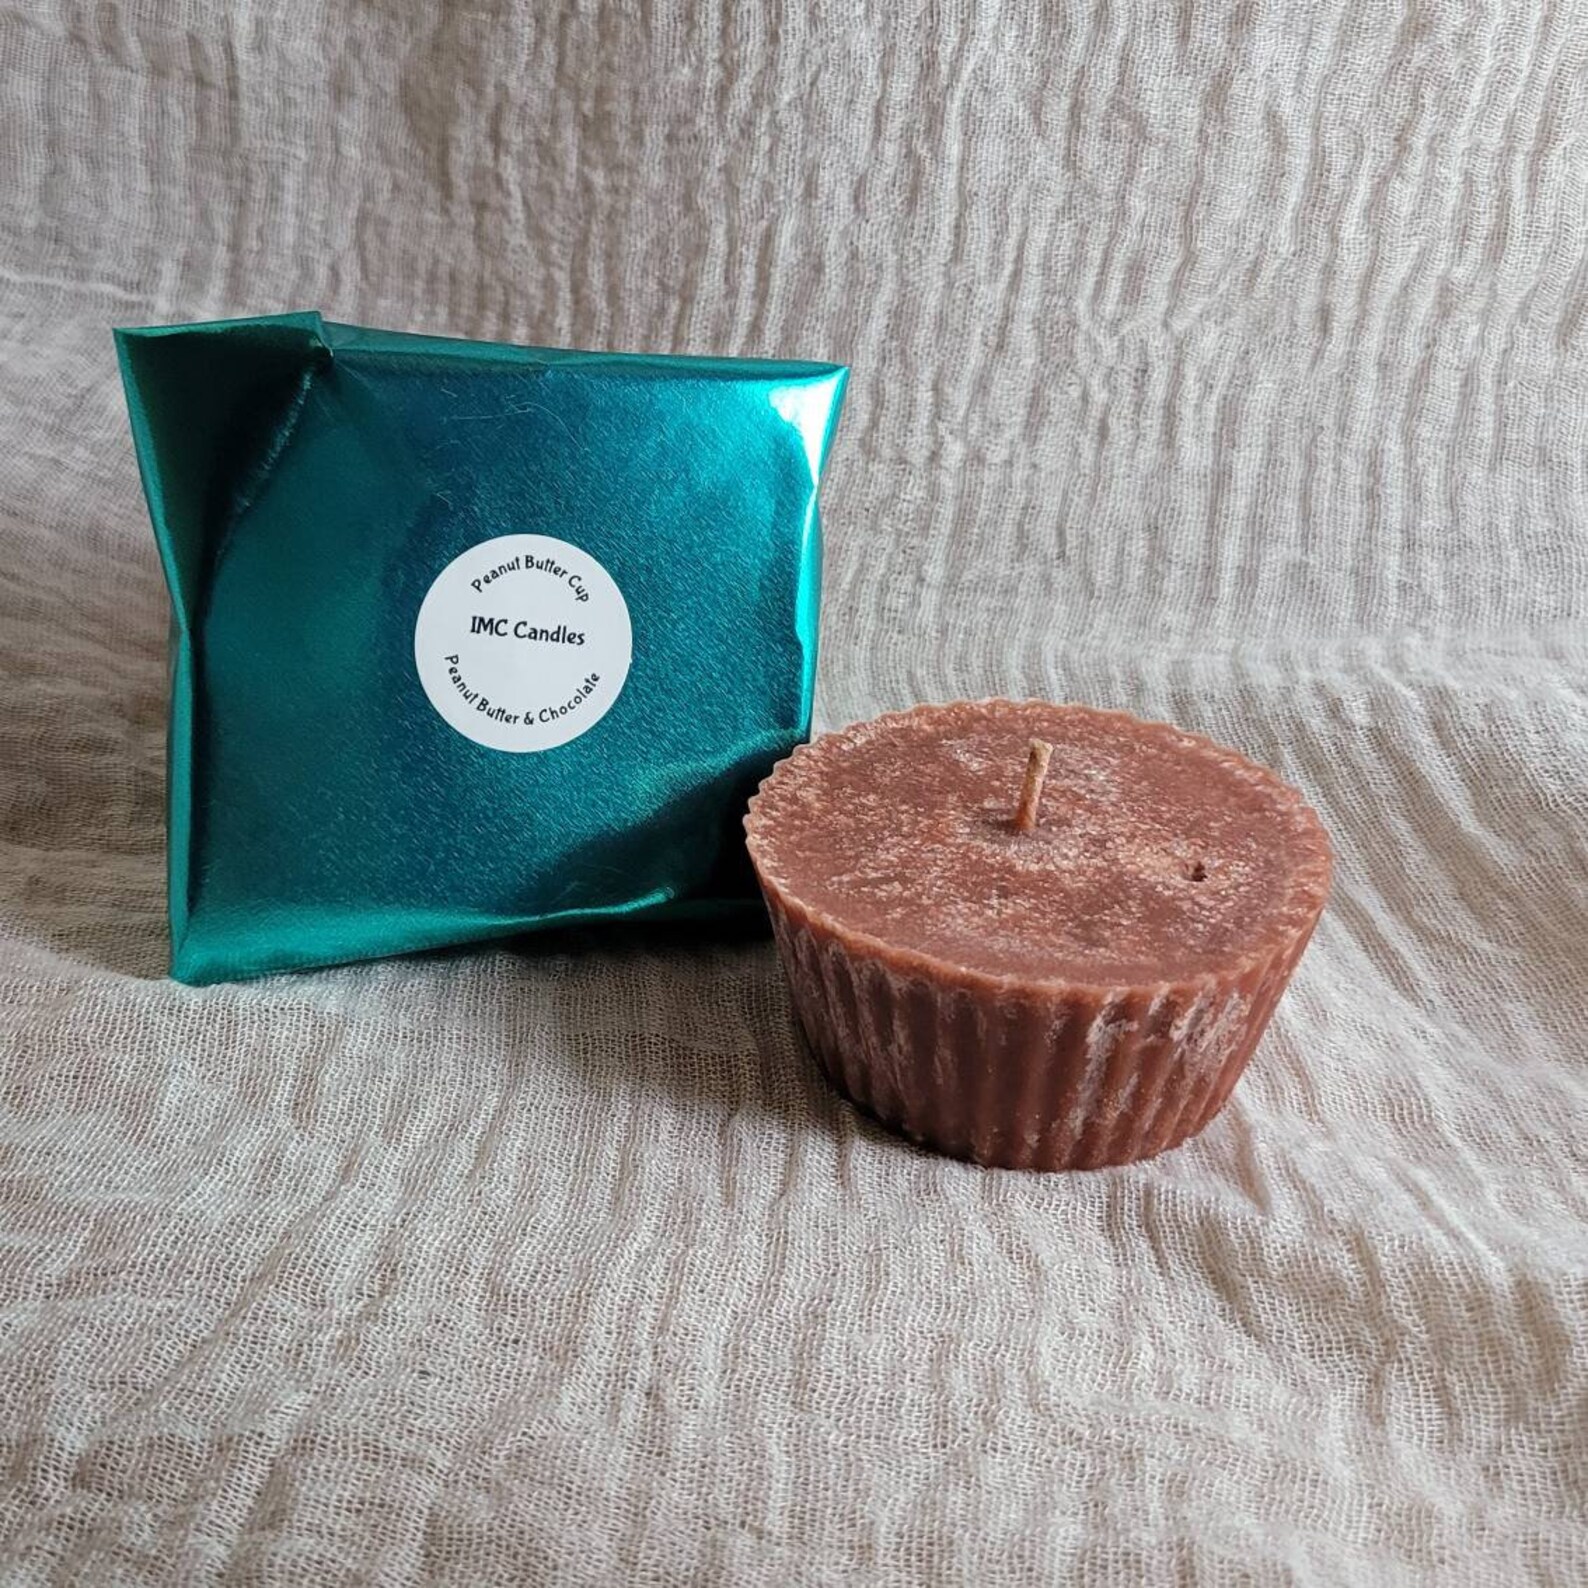 Peanut Butter Cup 2 Ounce Candle | Etsy